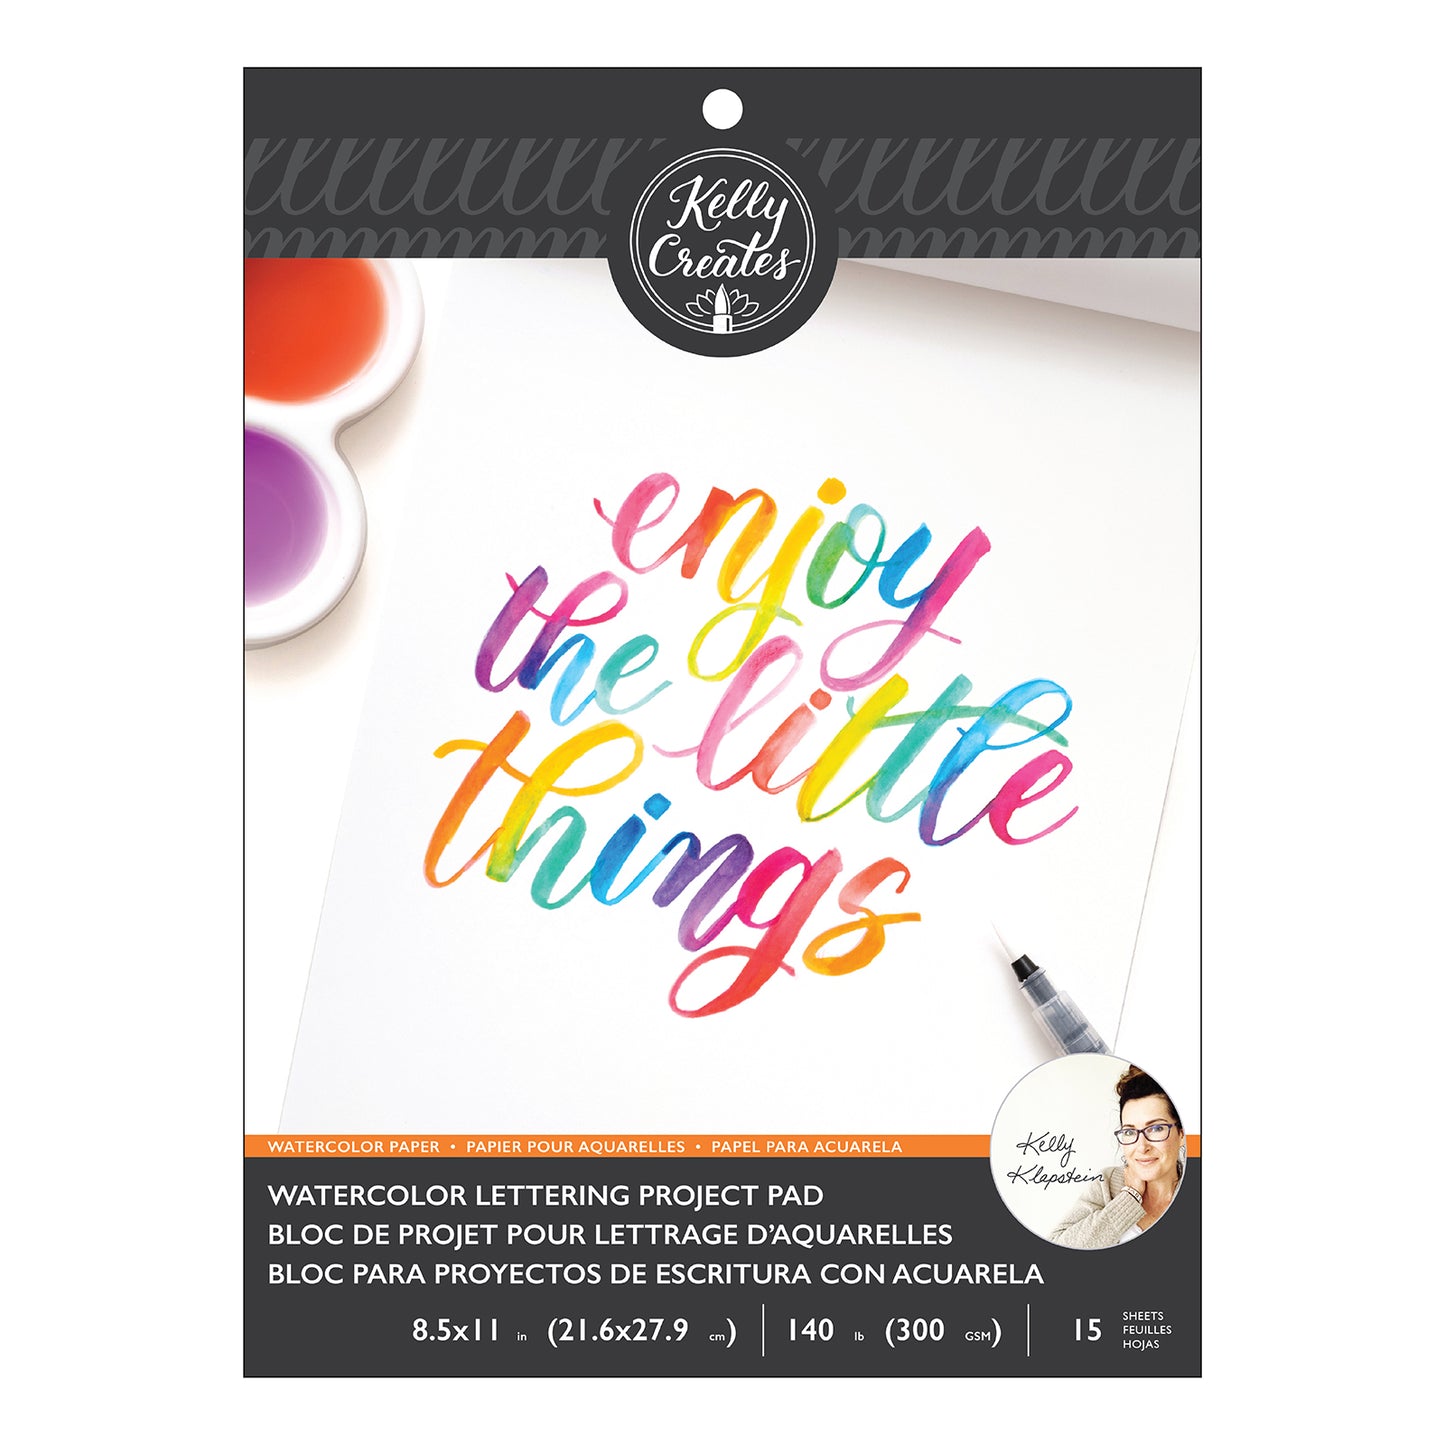 Kelly Creates Watercolor Lettering Project Pad